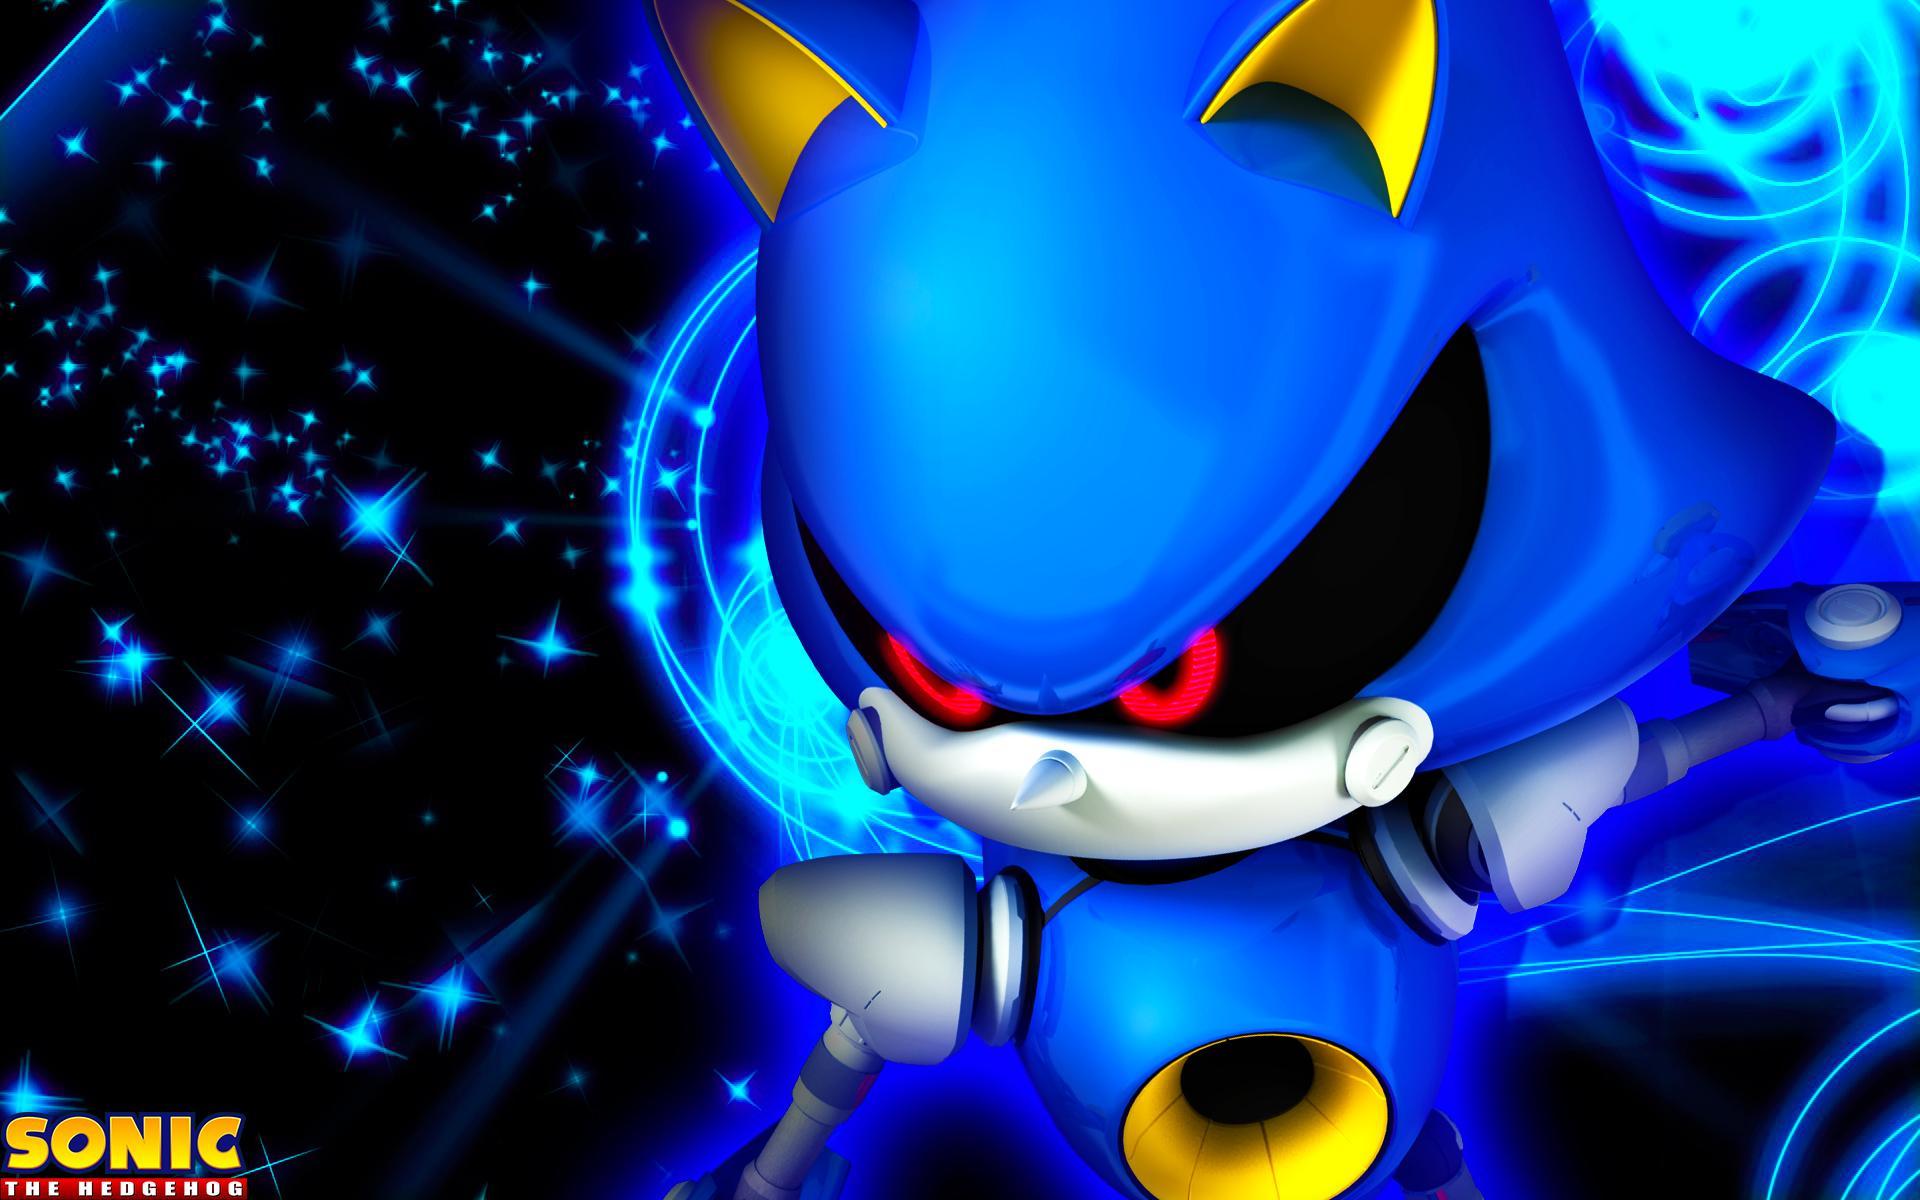 Download Sanic Wallpaper Wallpaper For your screen